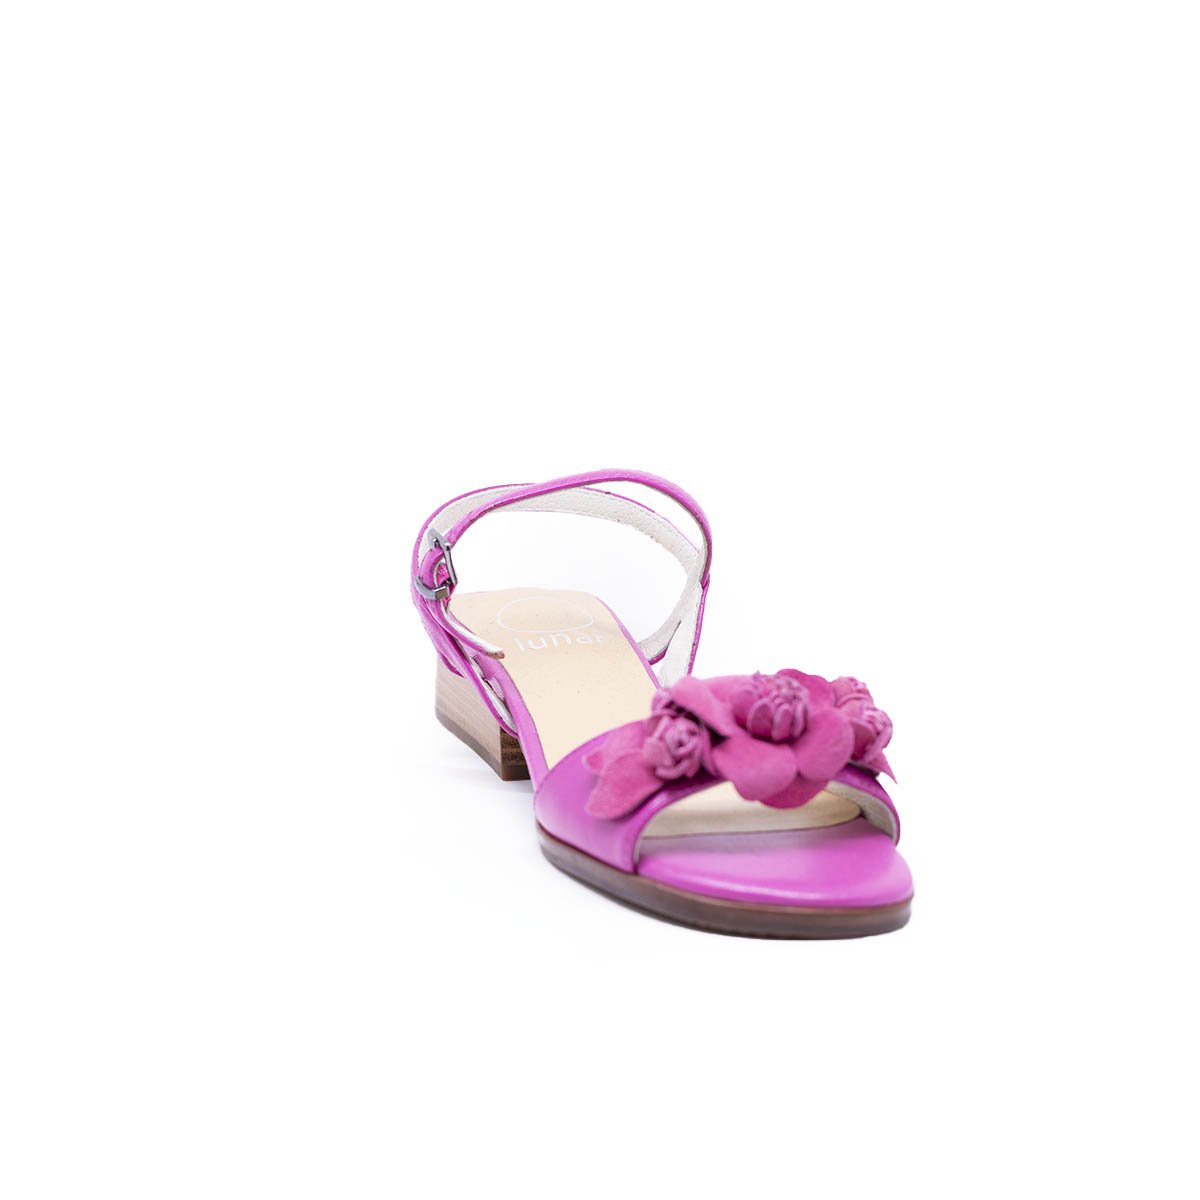 Lunar Silvie LU2009 - Clearance Shoes Fuschia / Nappa / 5 / 36  Available at Illusions Lingerie